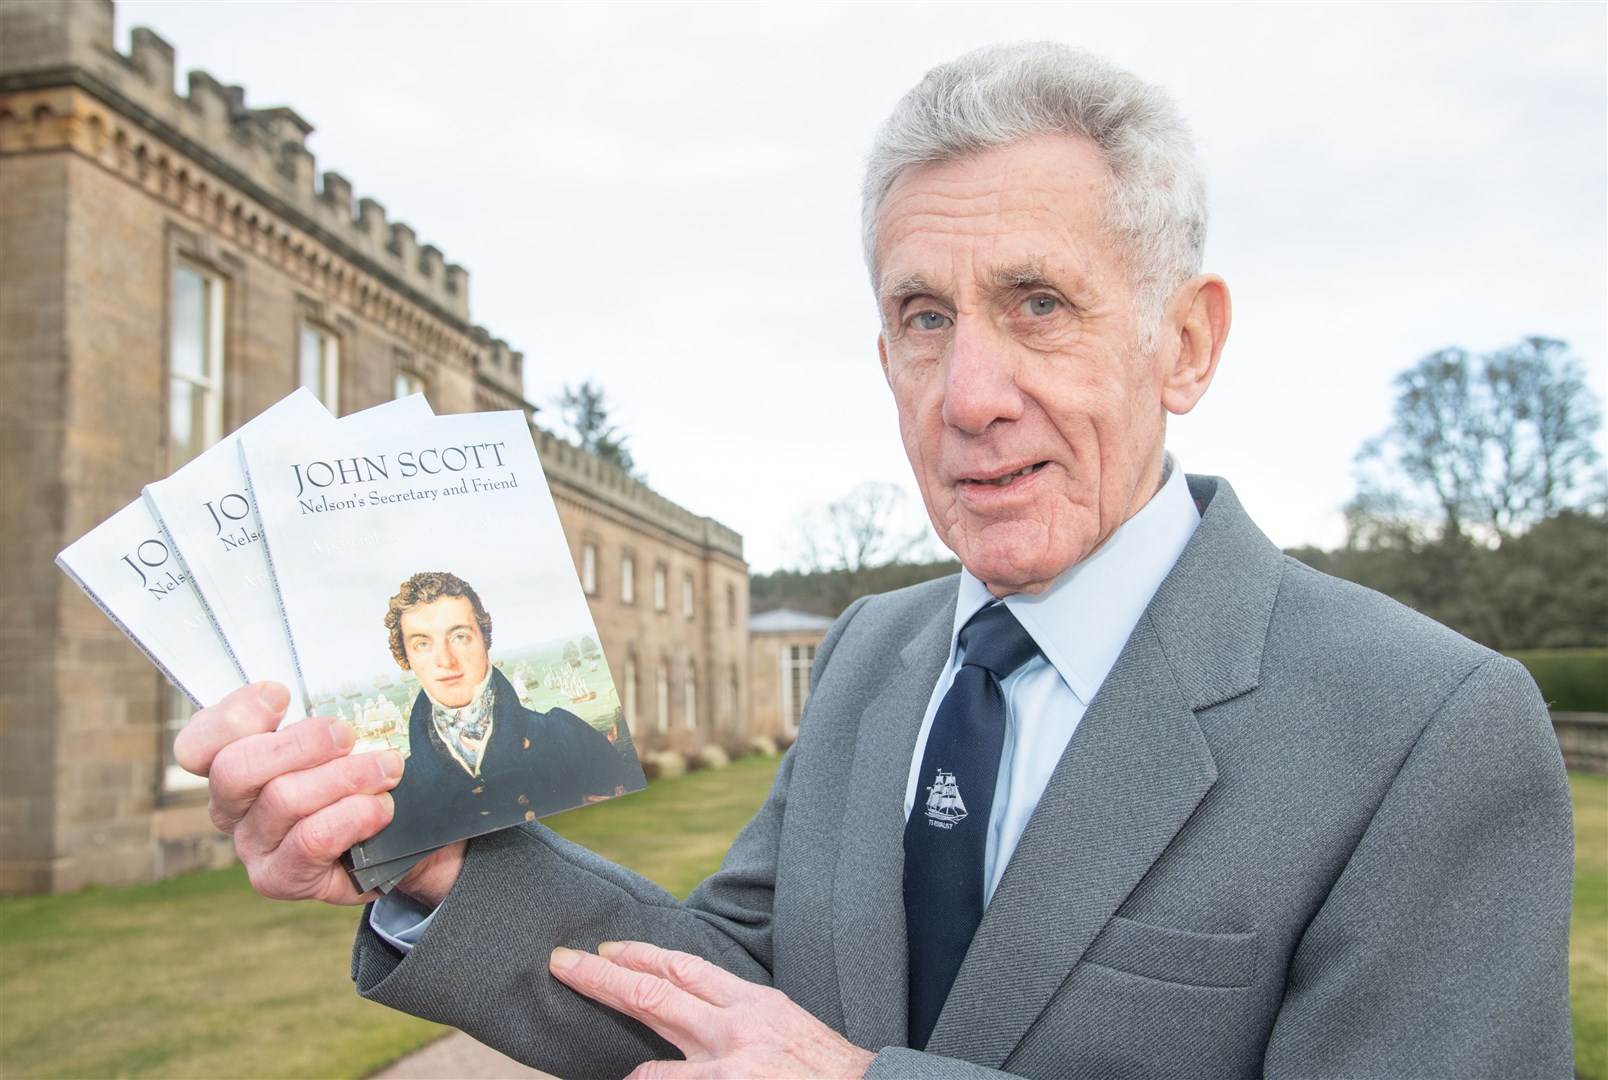 John Maynard has written a biography of John Scott - who was born in 1764 at Floods Farm, Spey Bay and whose career in the Royal Navy resulted in his close friendship with Lord Nelson. Picture: Daniel Forsyth